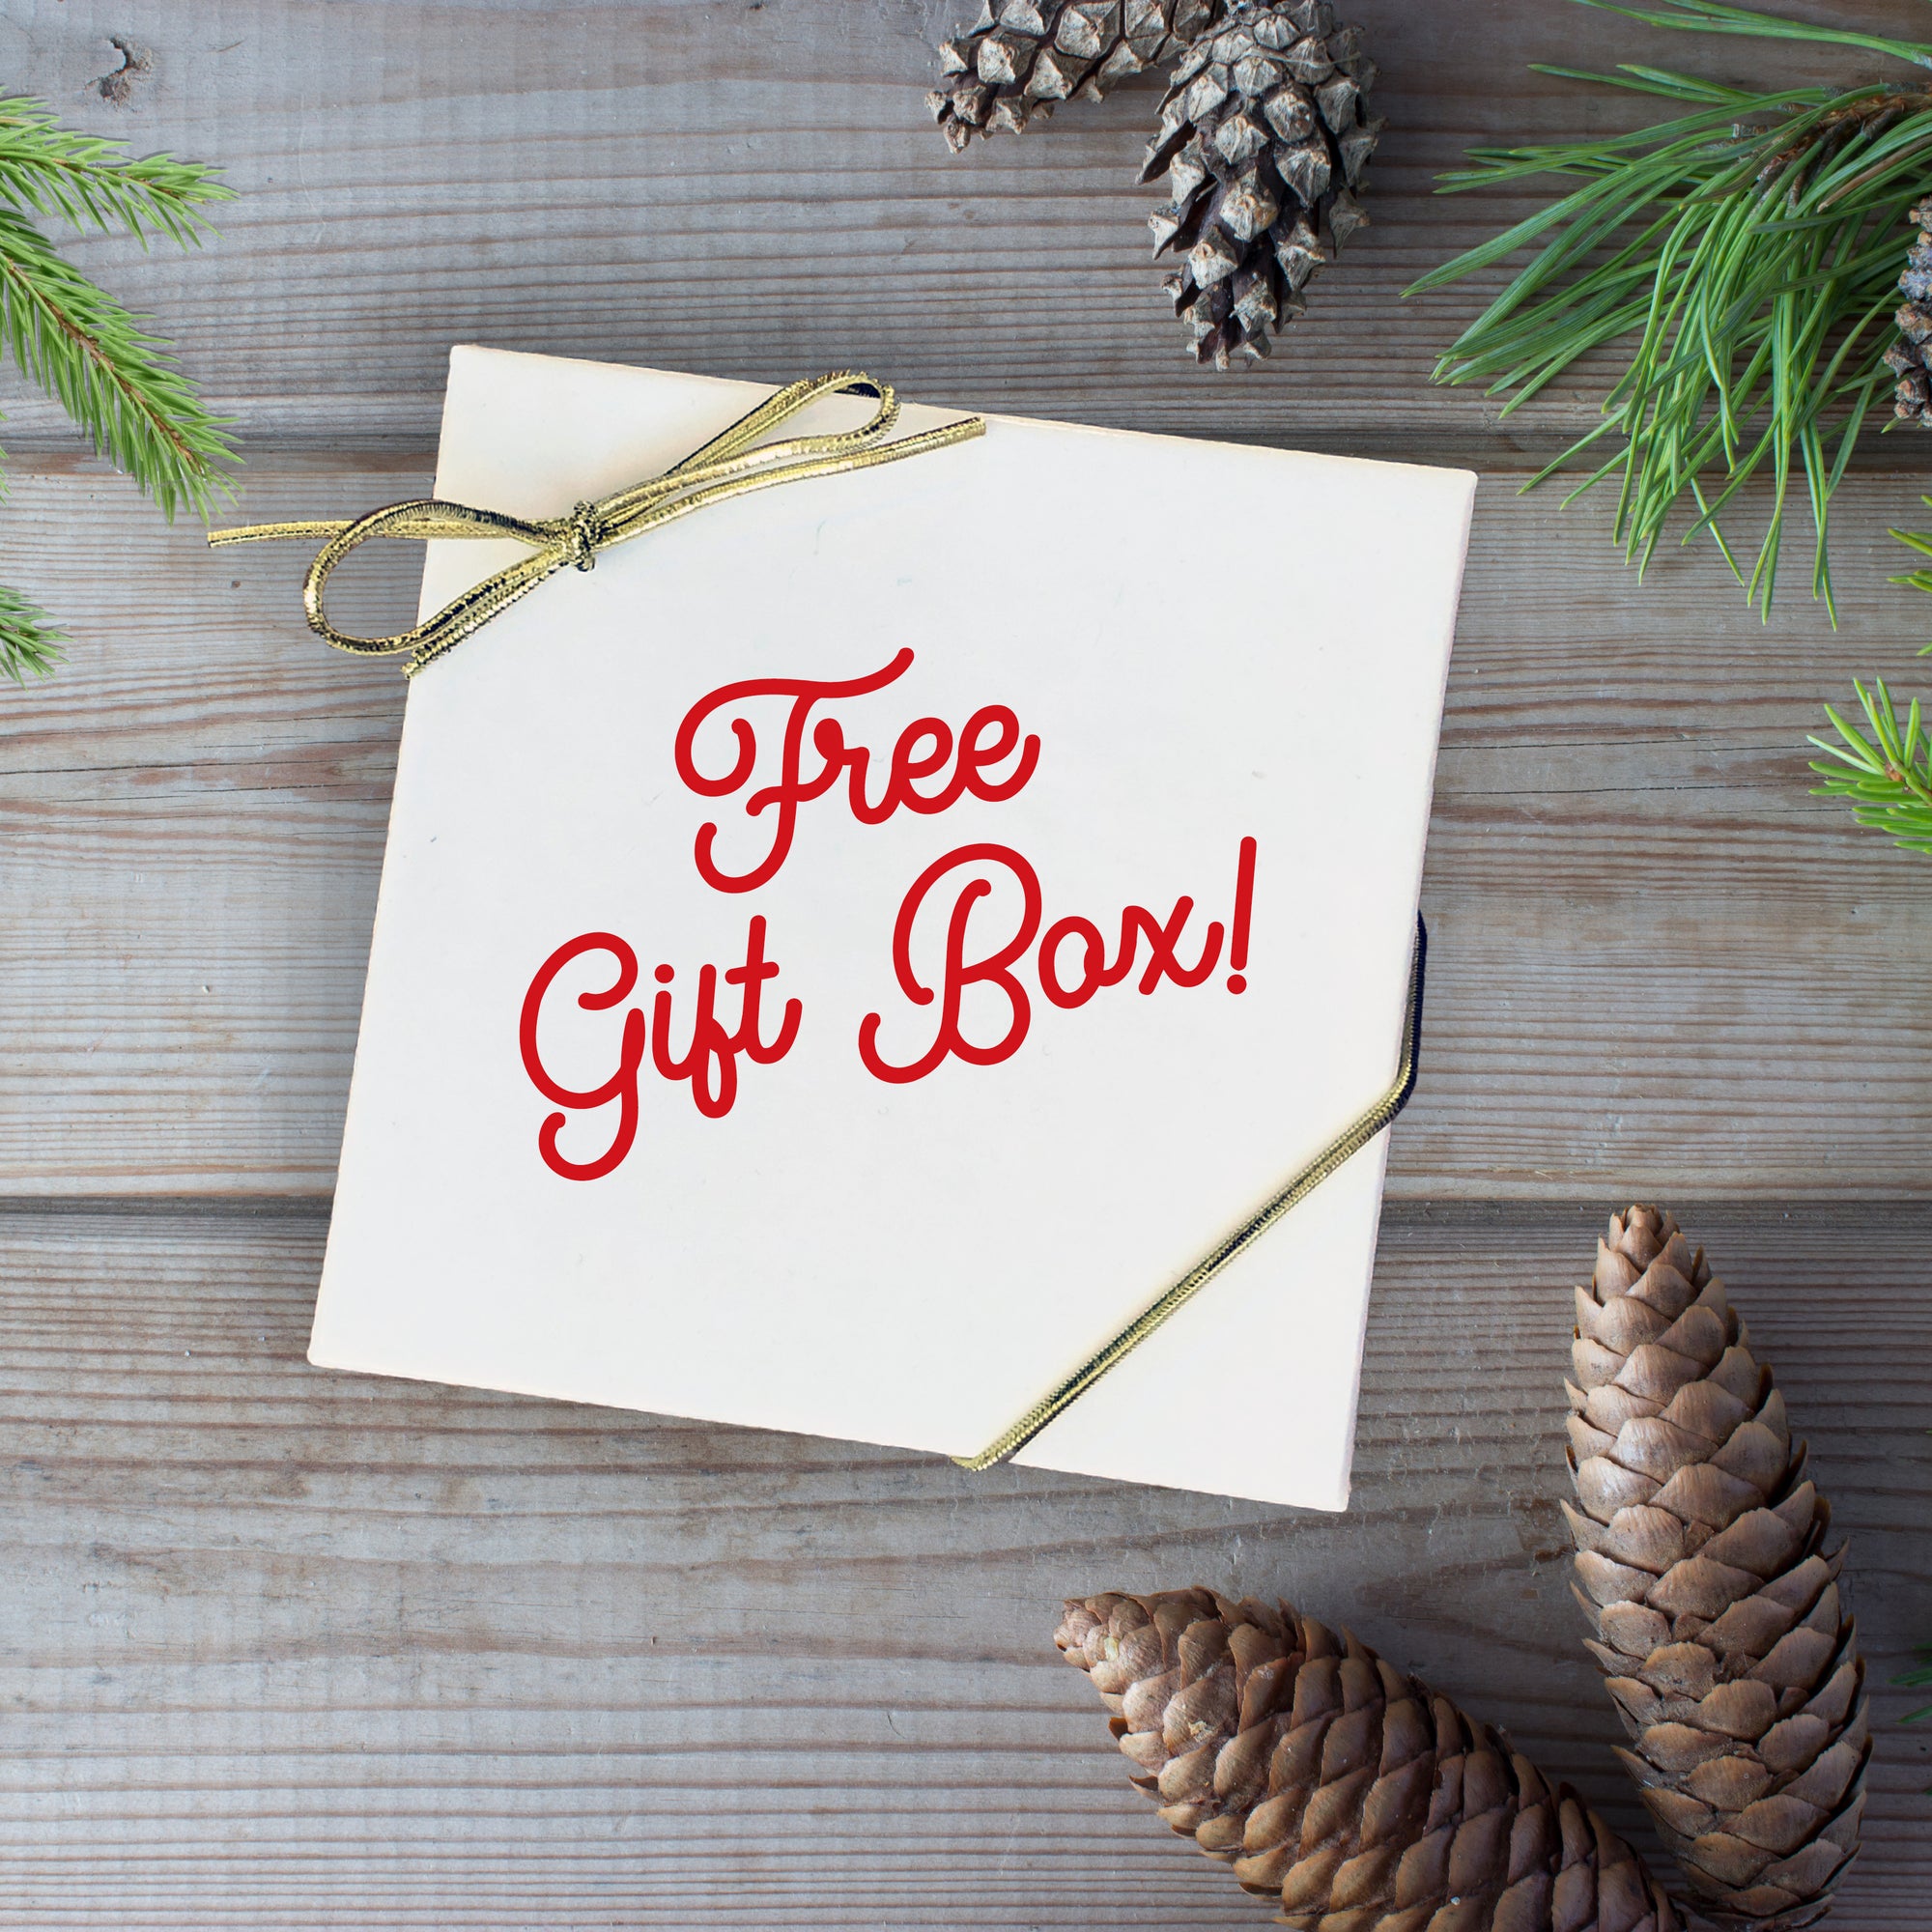 Free Gift box inlcuded